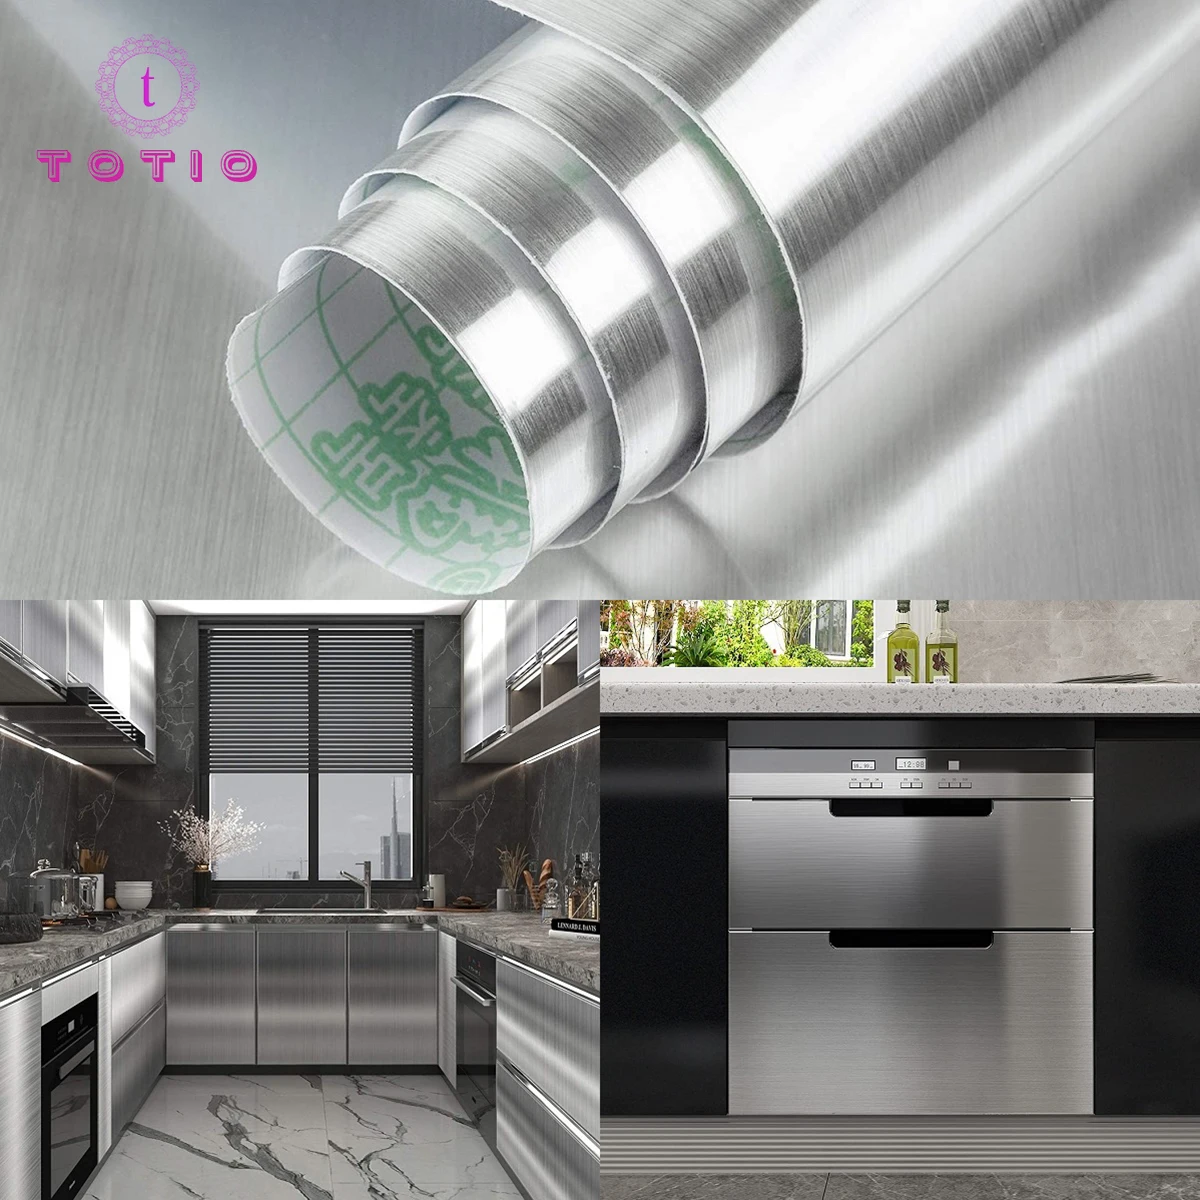 TOTIO Waterproof Silver Wallpaper Self Adhesive Stainless Steel Wallpaper Heat Resistance Vinyl Oilproof House Appliance Kitchen minimalist kitchen sink faucet 304 stainless steel cold and hot faucet house holdrotatable anti splash water faucet